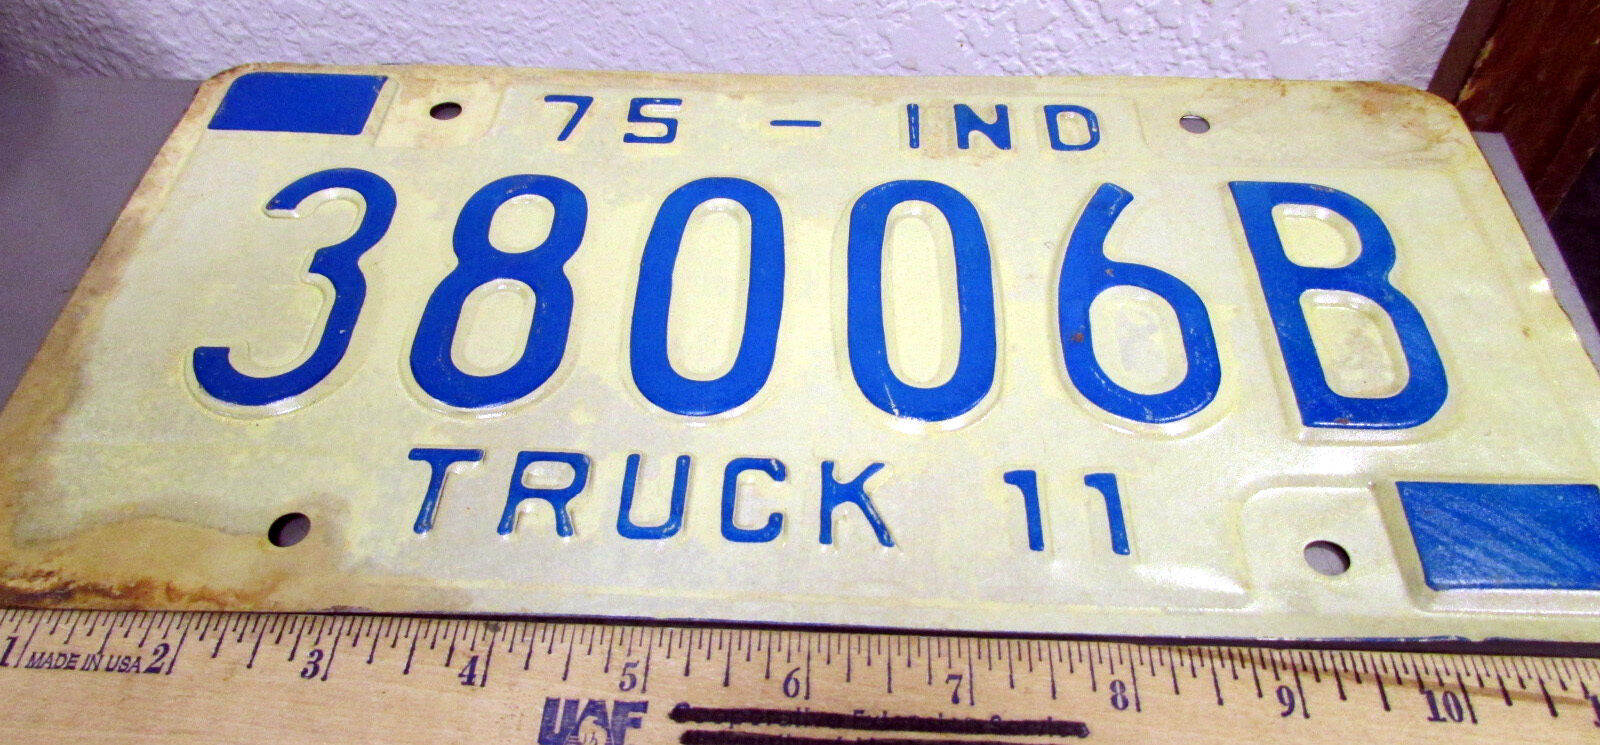 Indiana License Plate 1975 Truck Plate, 38006b, Blue On White Plate, Nice